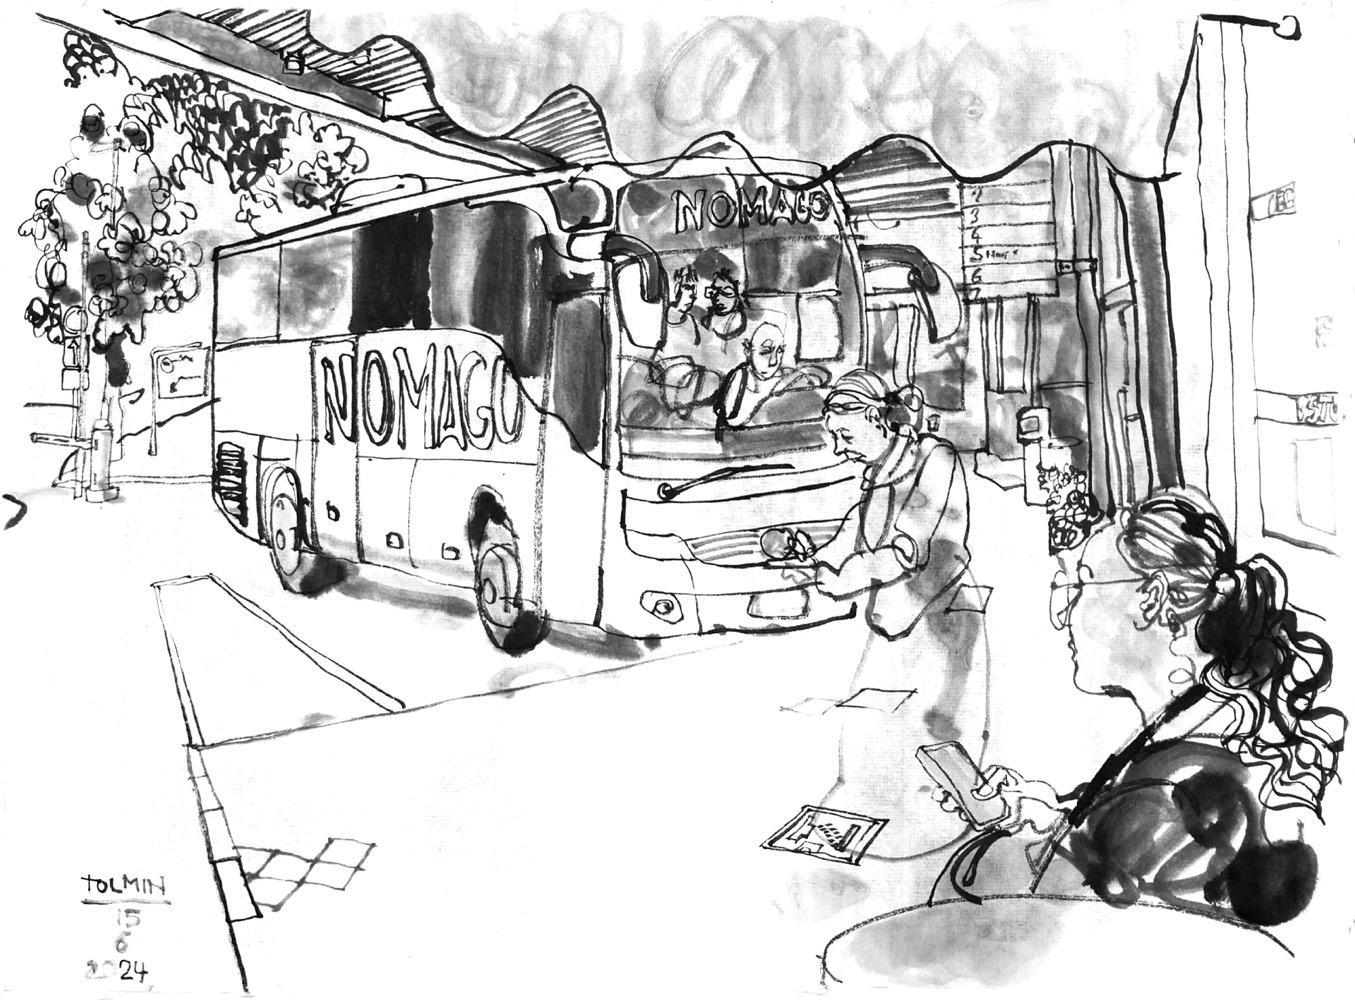 Ink drawing of a Busstation, Bus in center, travellers waiting and checking phones in front.